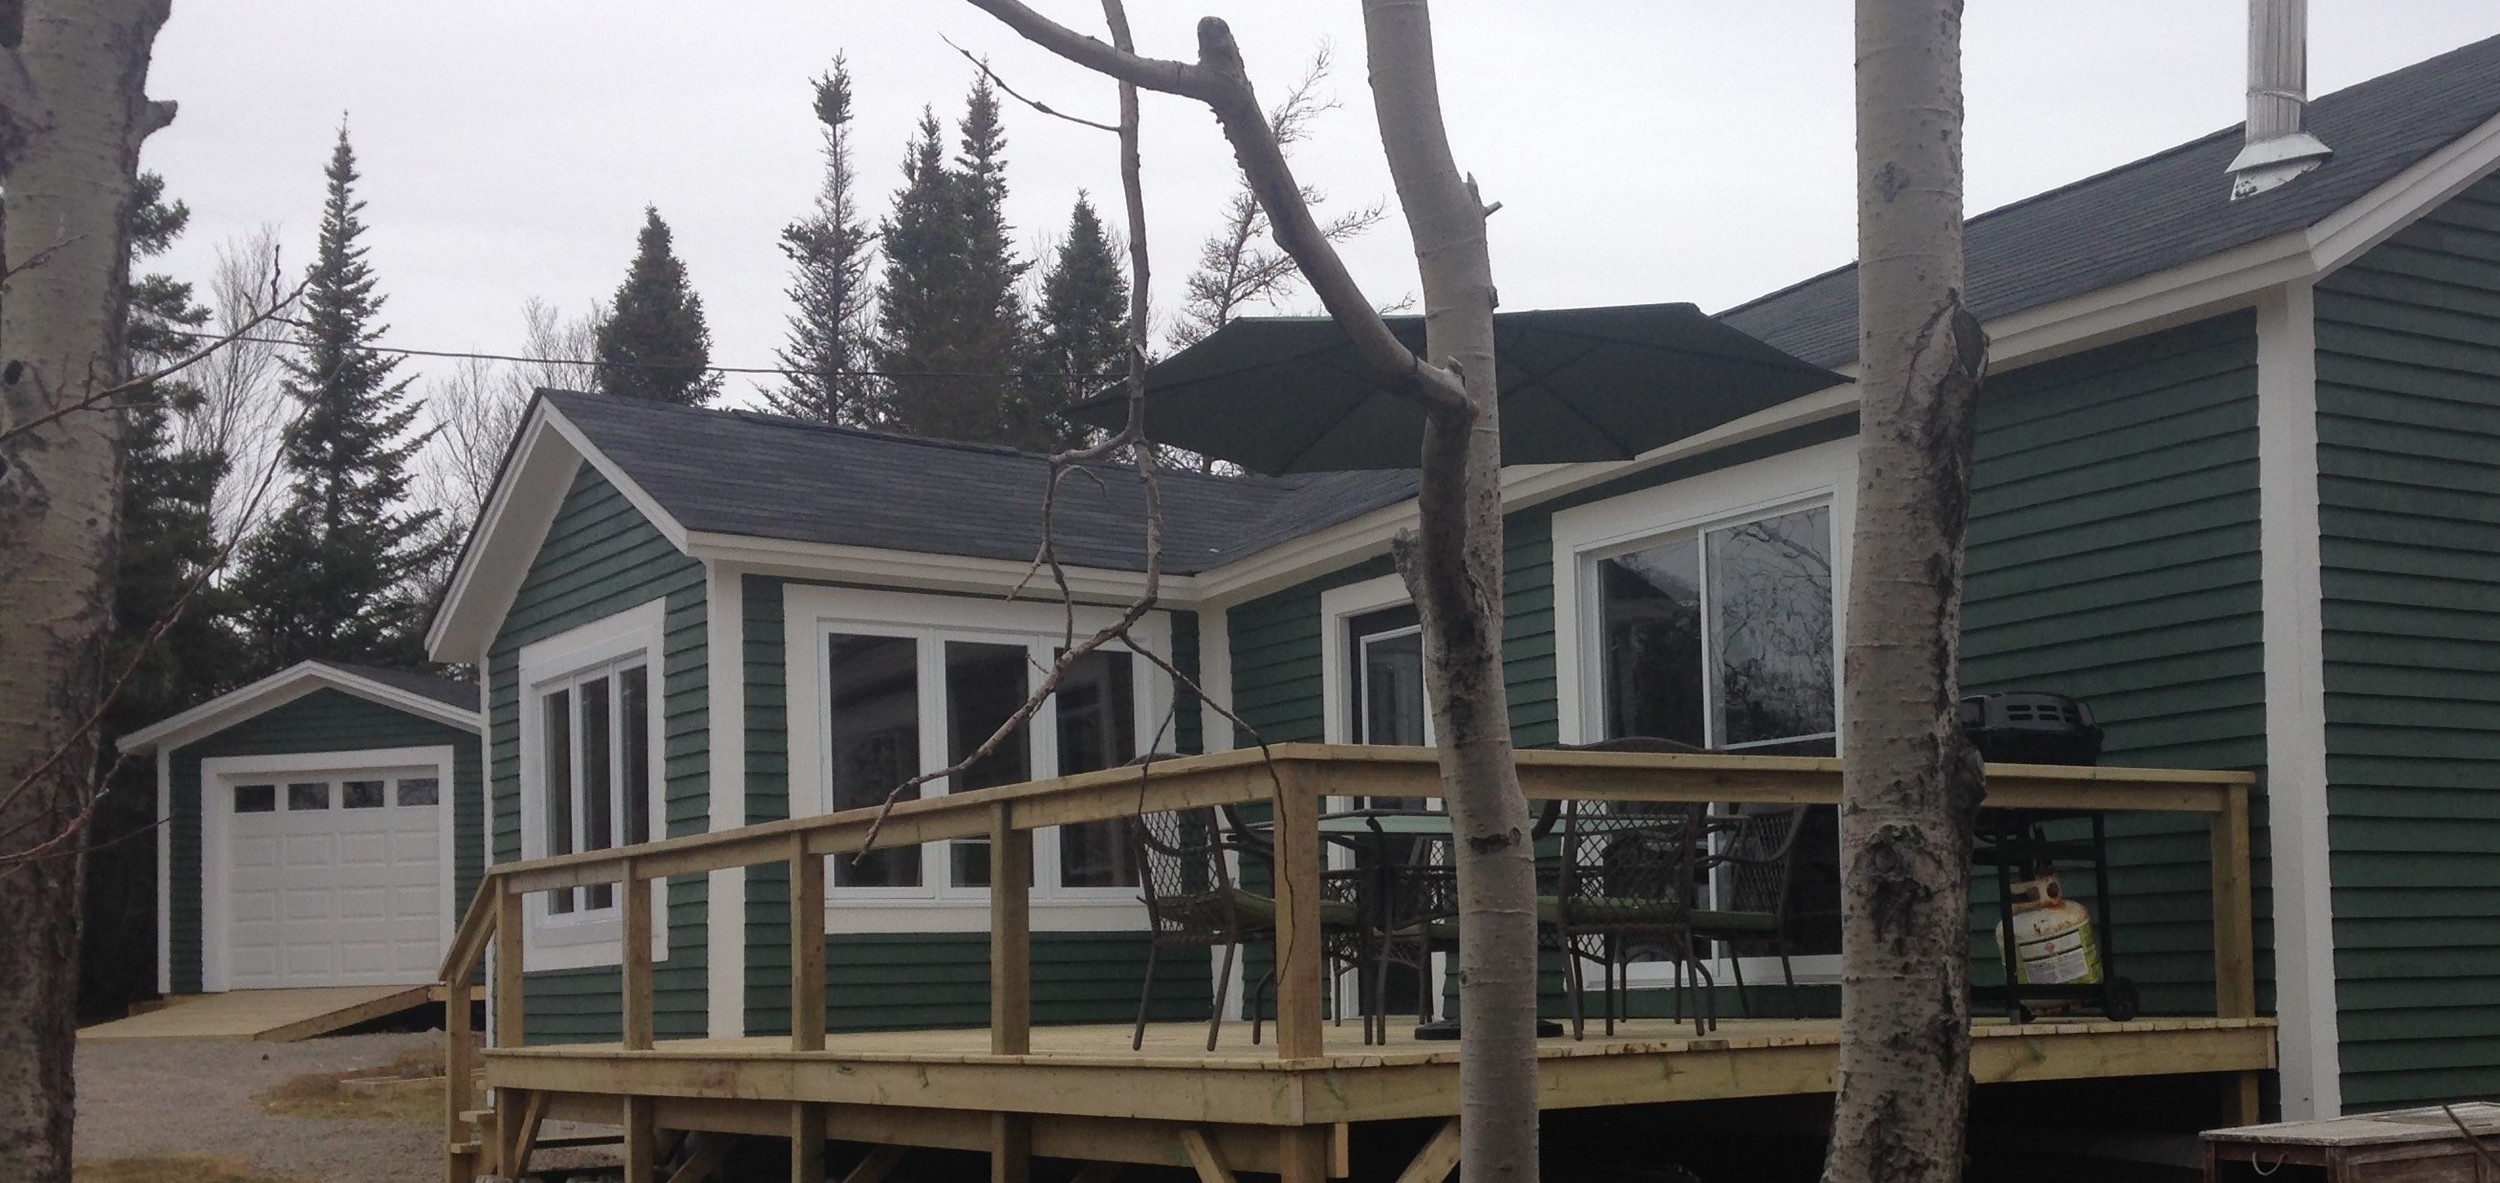 New wood siding and new deck to enjoy the view of the pond